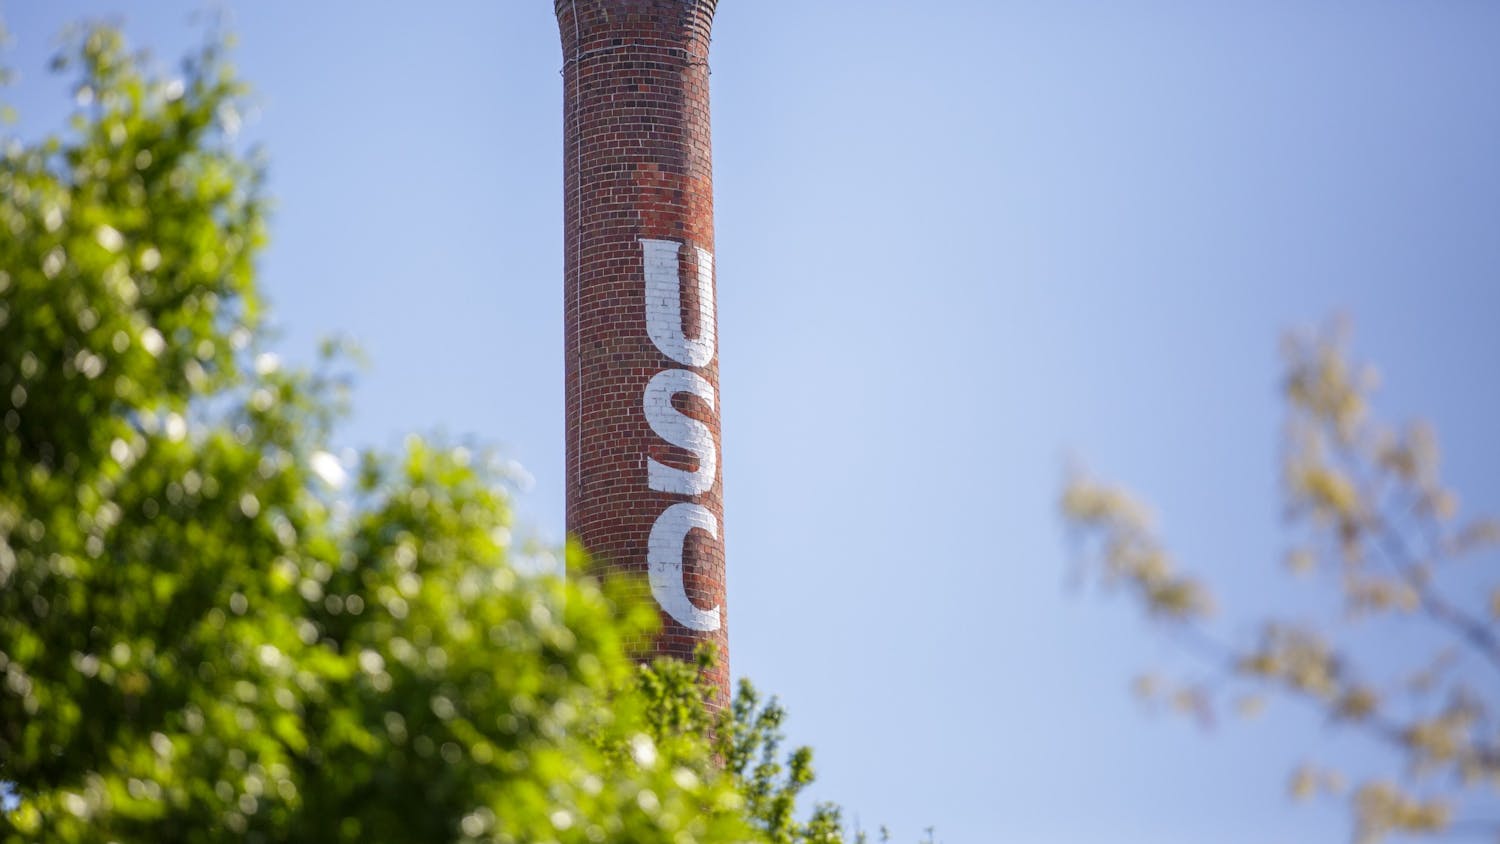 The USC smokestack is located next to the Horseshoe and is a landmark on the campus.